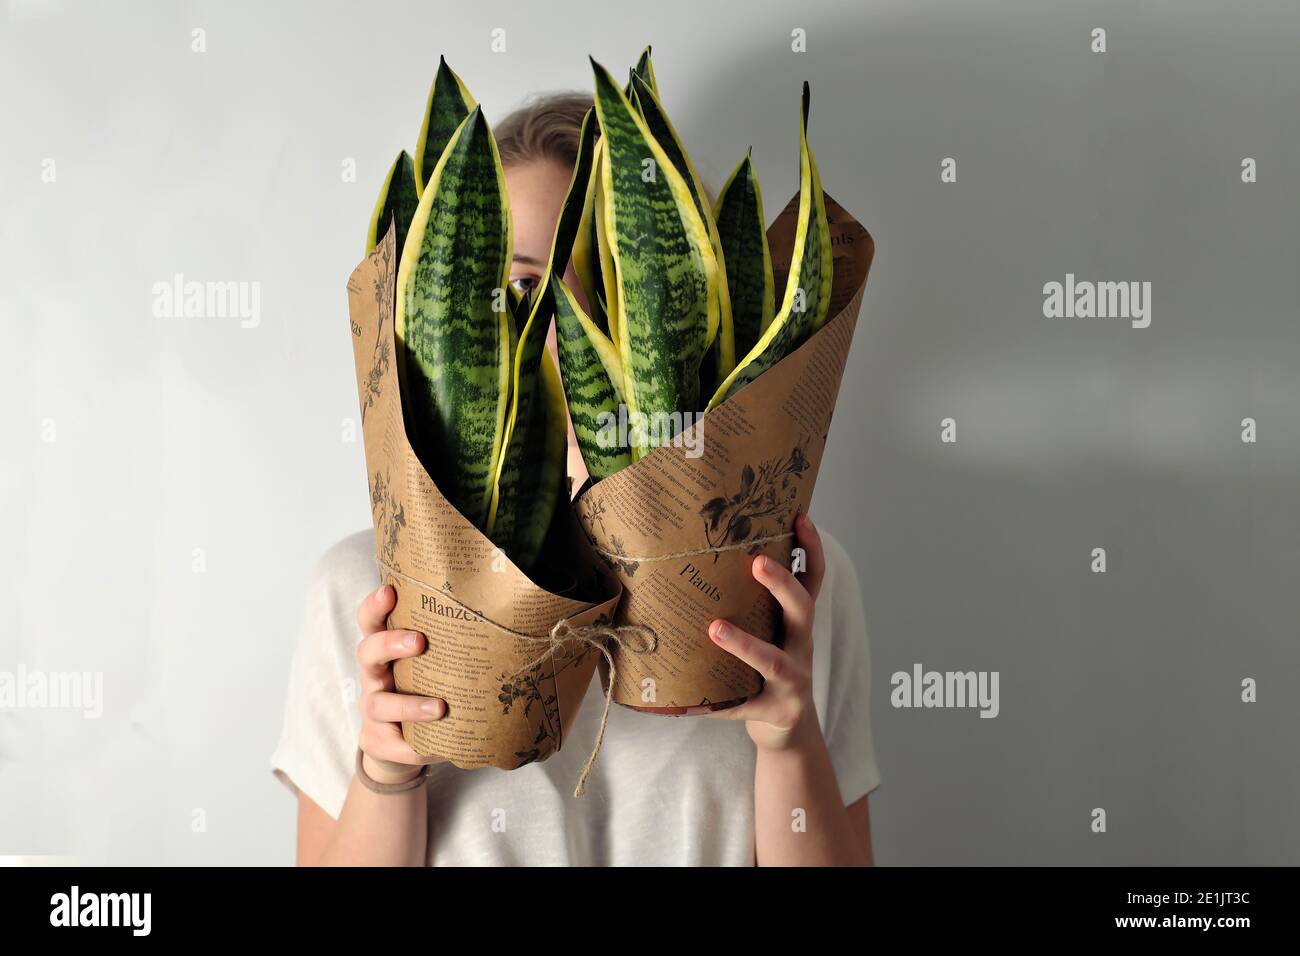 young woman holds two succulet house plants with yellow and green leaves - a new addition to her indoor garden Stock Photo